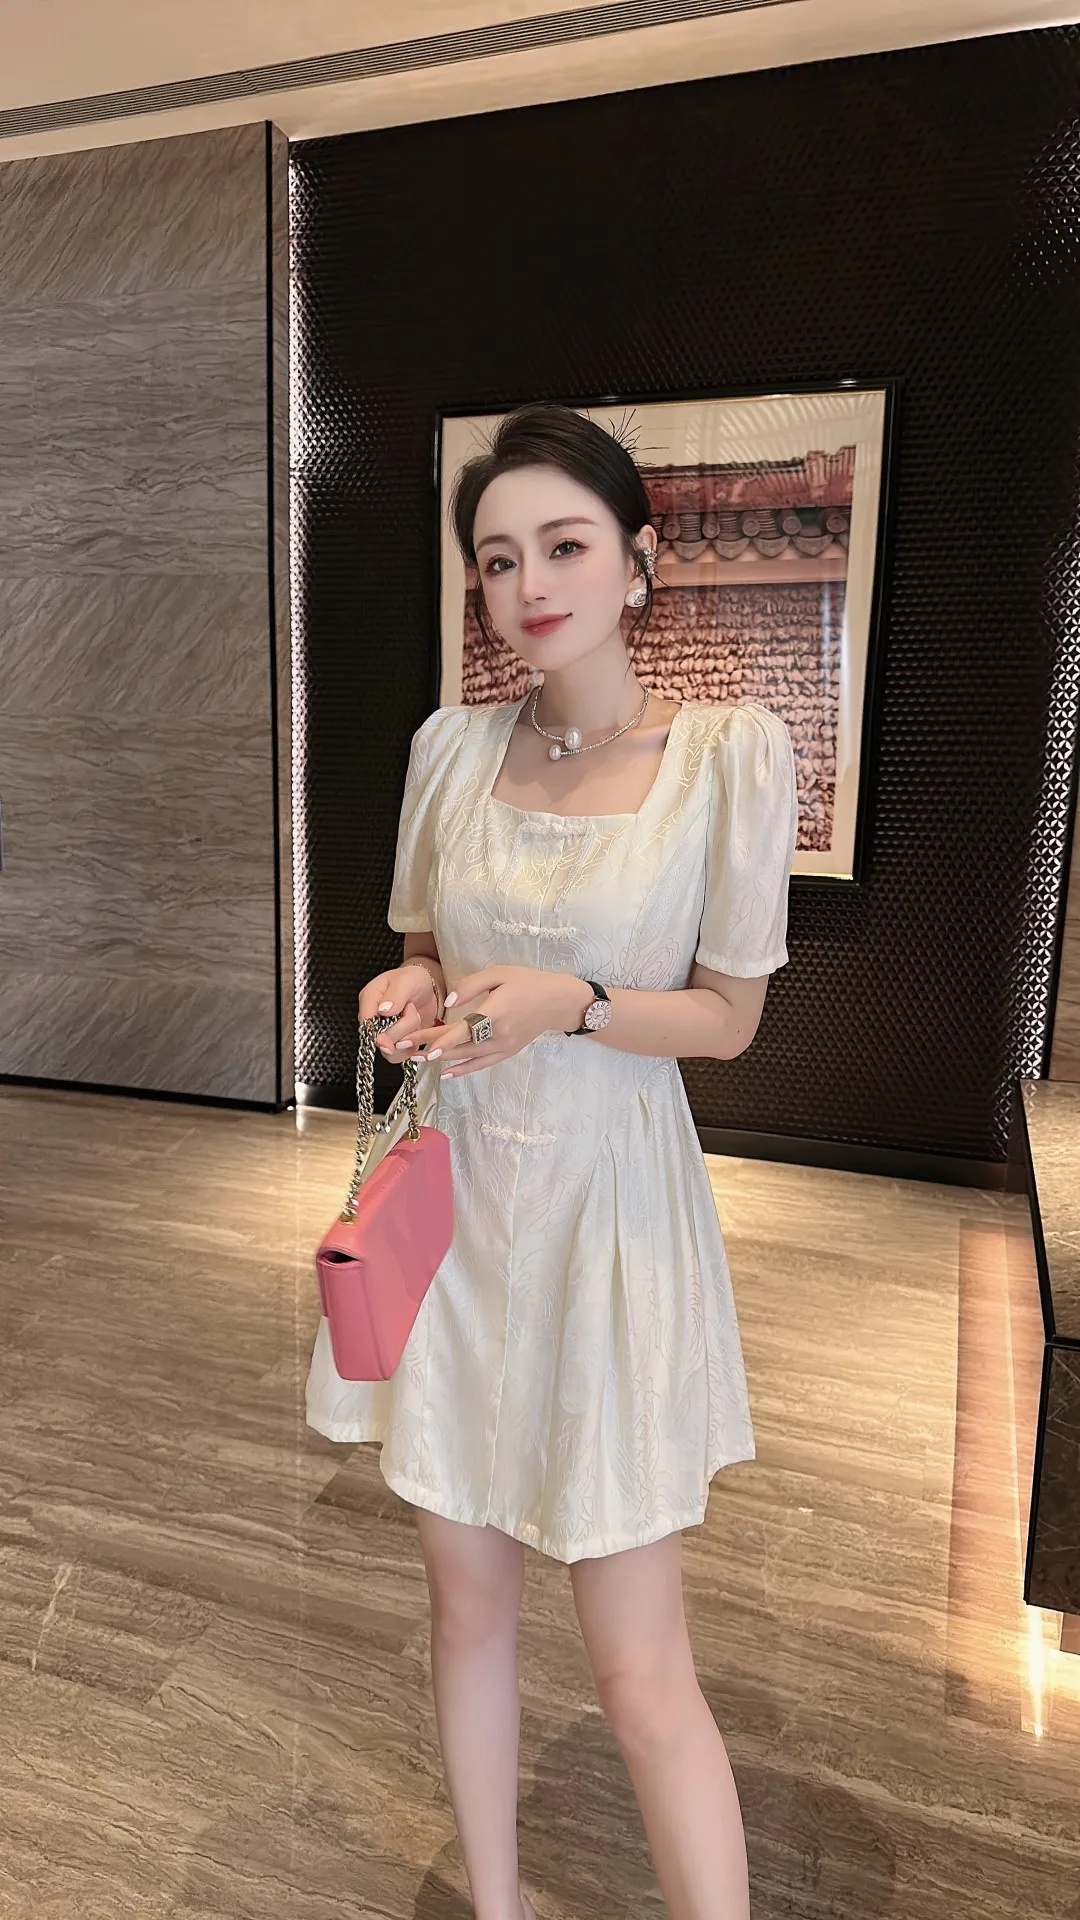 

2023 Spring/Summer Fashion New Women's Clothing Square Collar Puff Sleeve Jacquard Printed Dress 0704